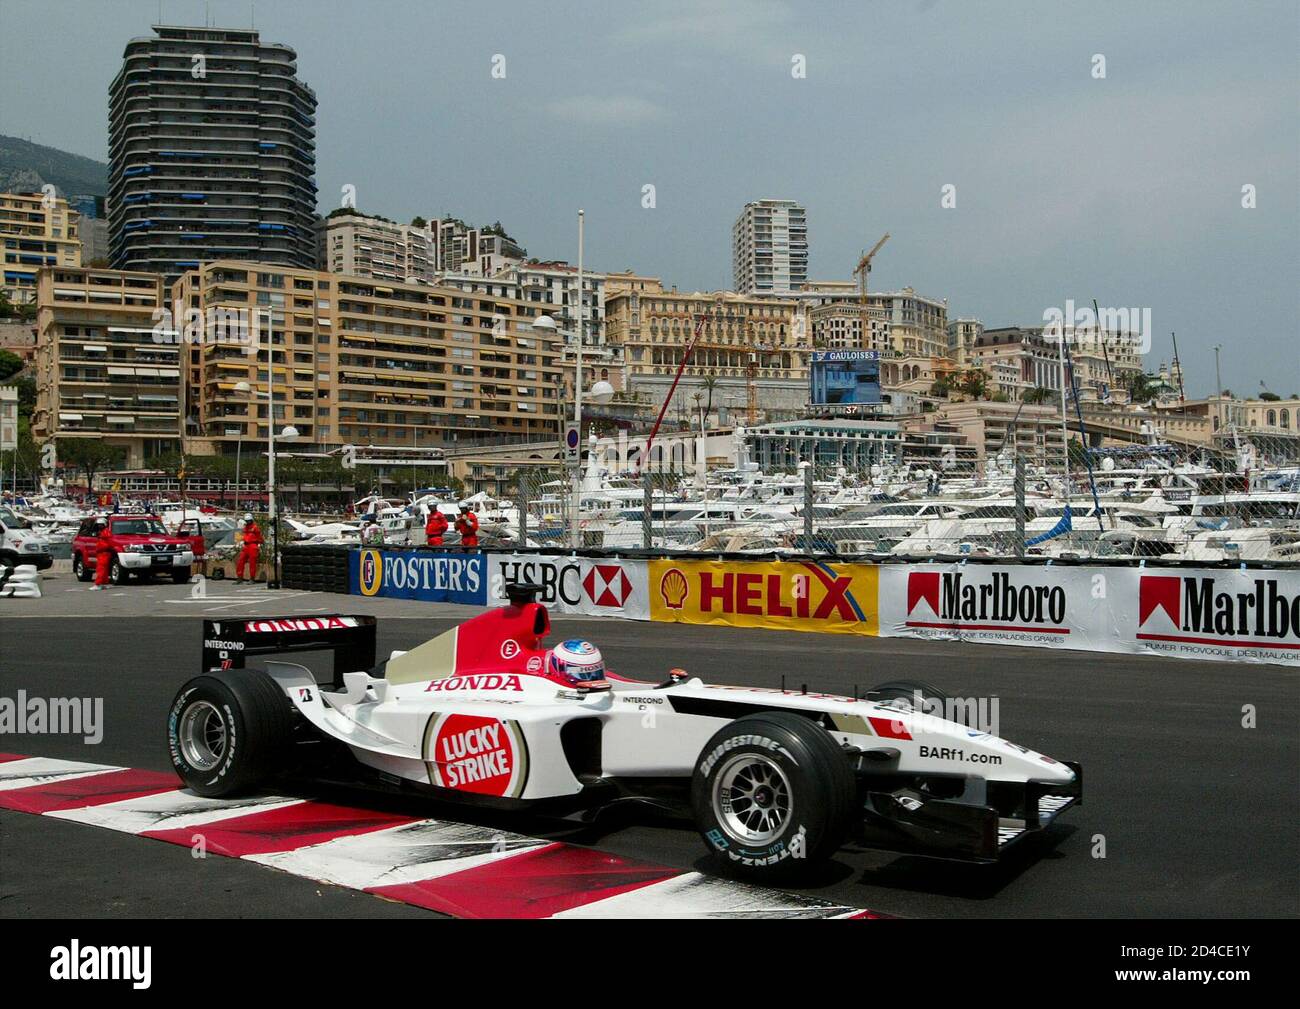 Jenson Button of Britain drives his Bar Honda at the port of Monte Carlo  during the qualifying session for the Monaco Formula One Grand Prix in  Monaco on May 29, 2003. Button